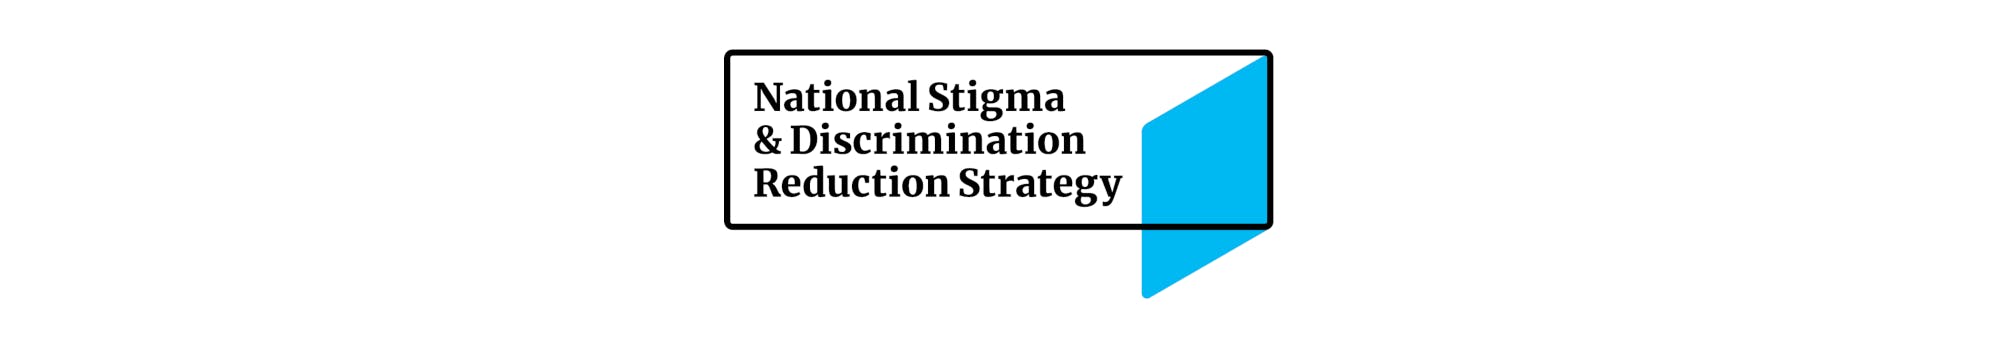 National Stigma and Discrimination Reduction Strategy